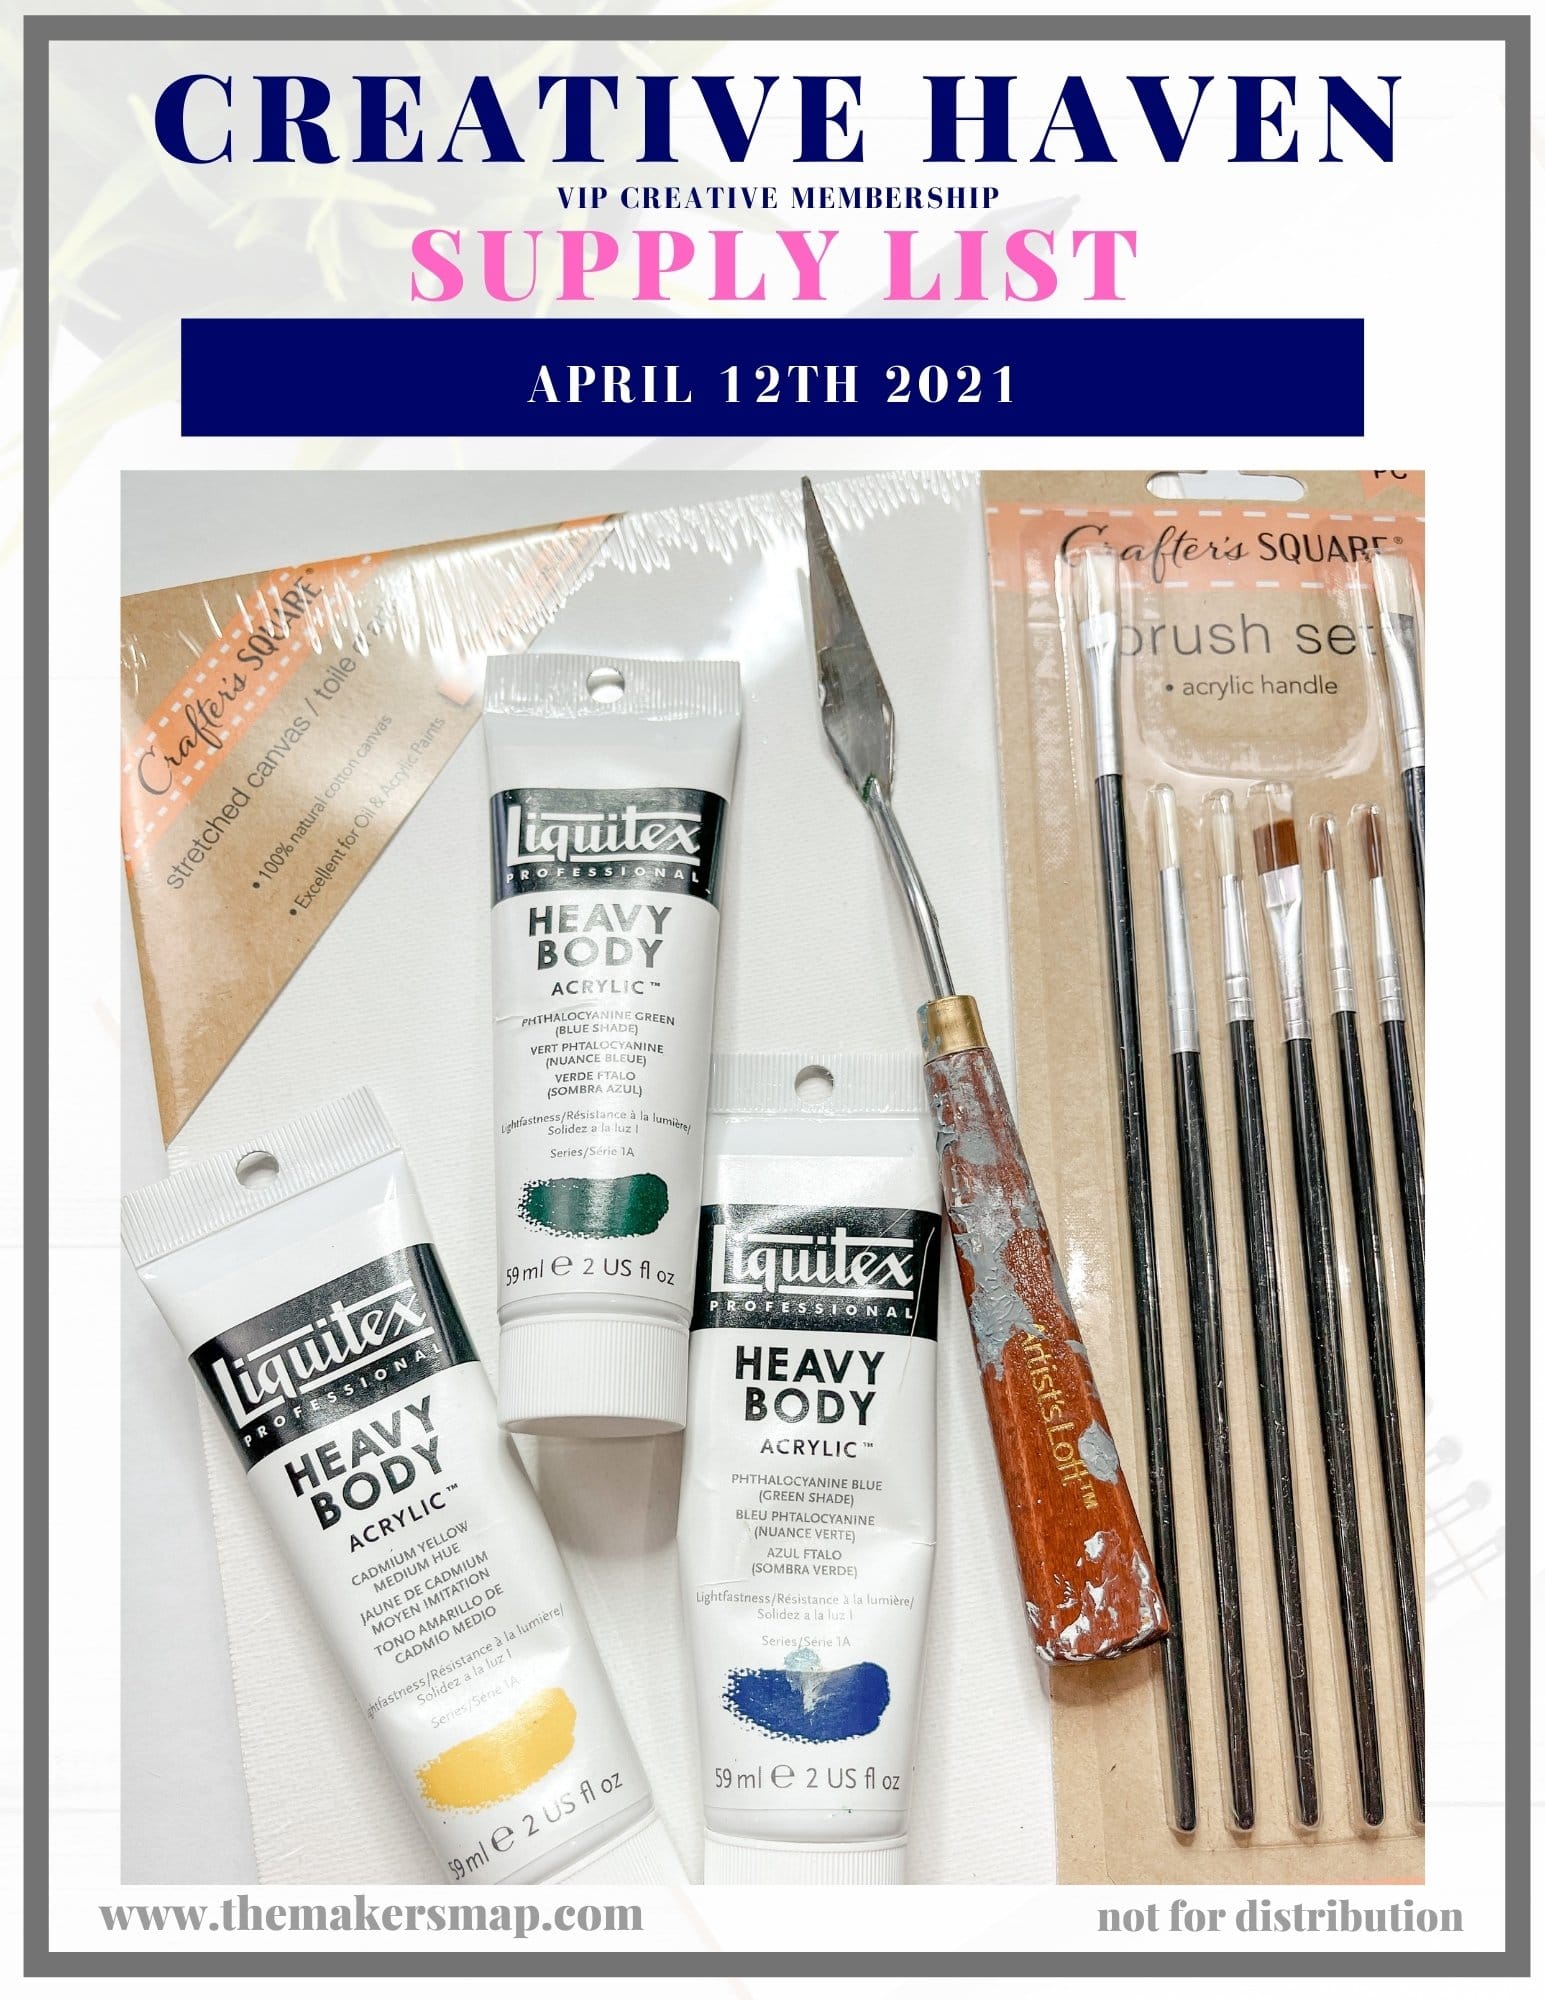 Crafter's Collection Acrylic Paint - 12 Piece Set, Hobby Lobby